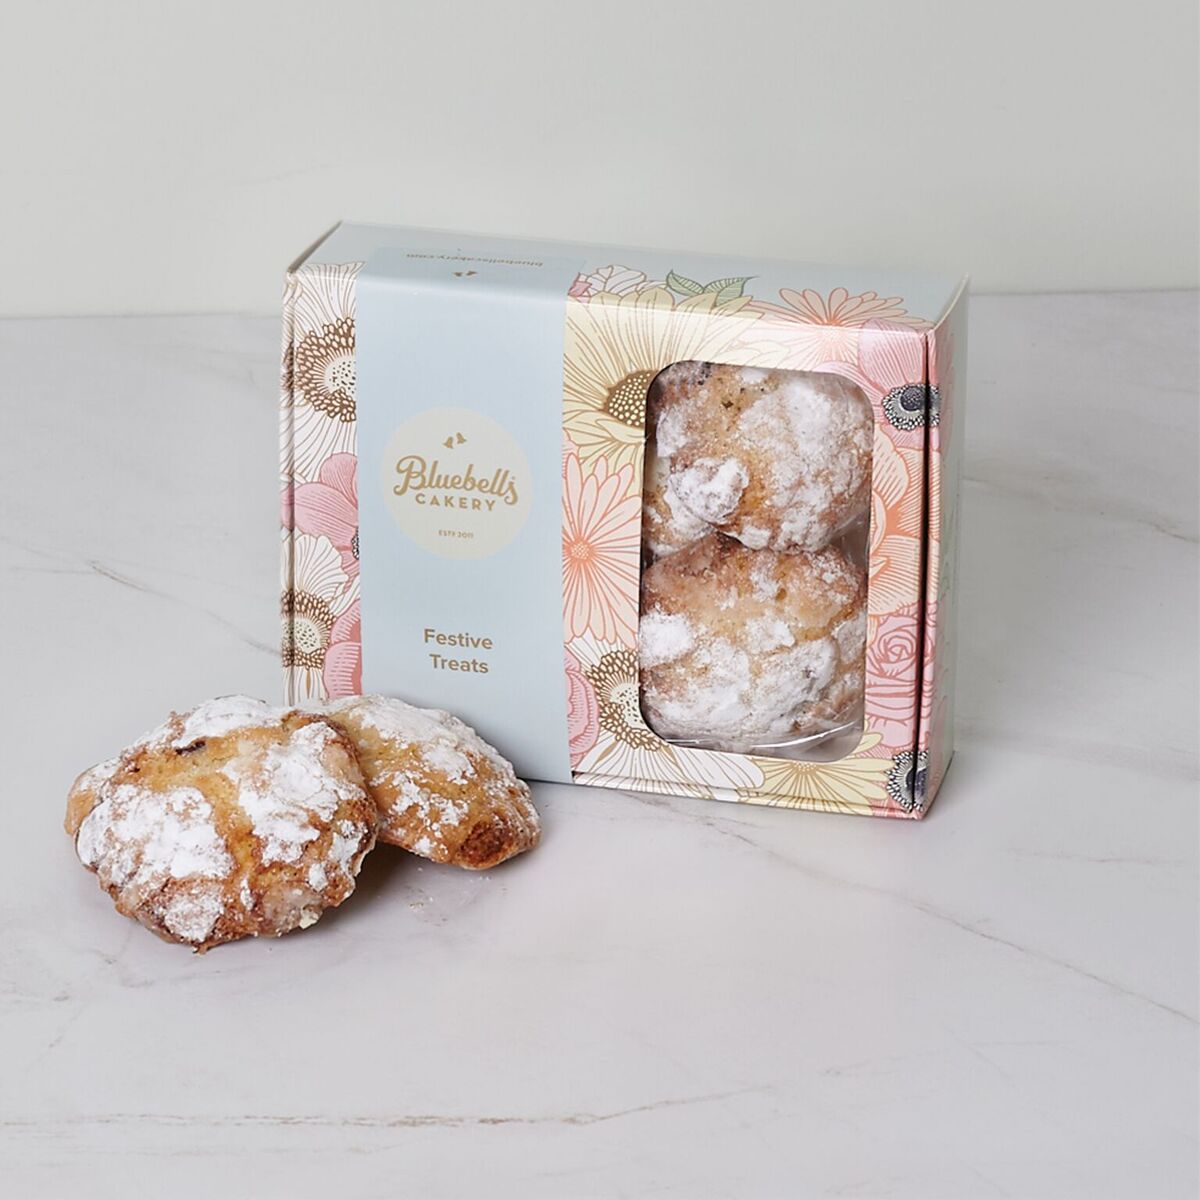 Bluebells Cakery's Festive Treats Amaretti biscuits, $12 from Bluebells Cakery